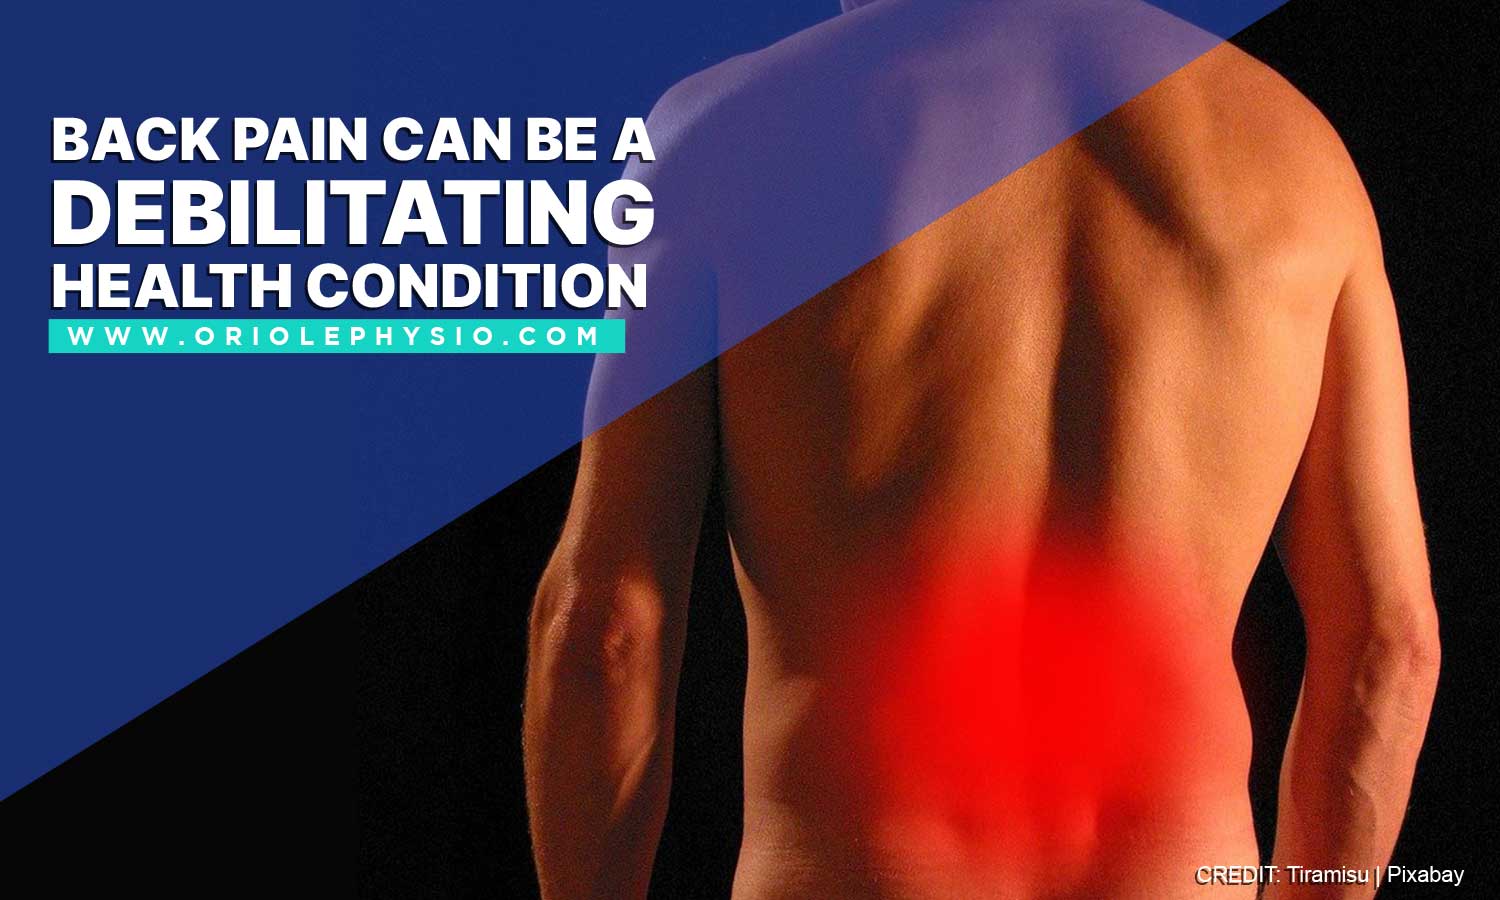 Back pain can be a debilitating health condition